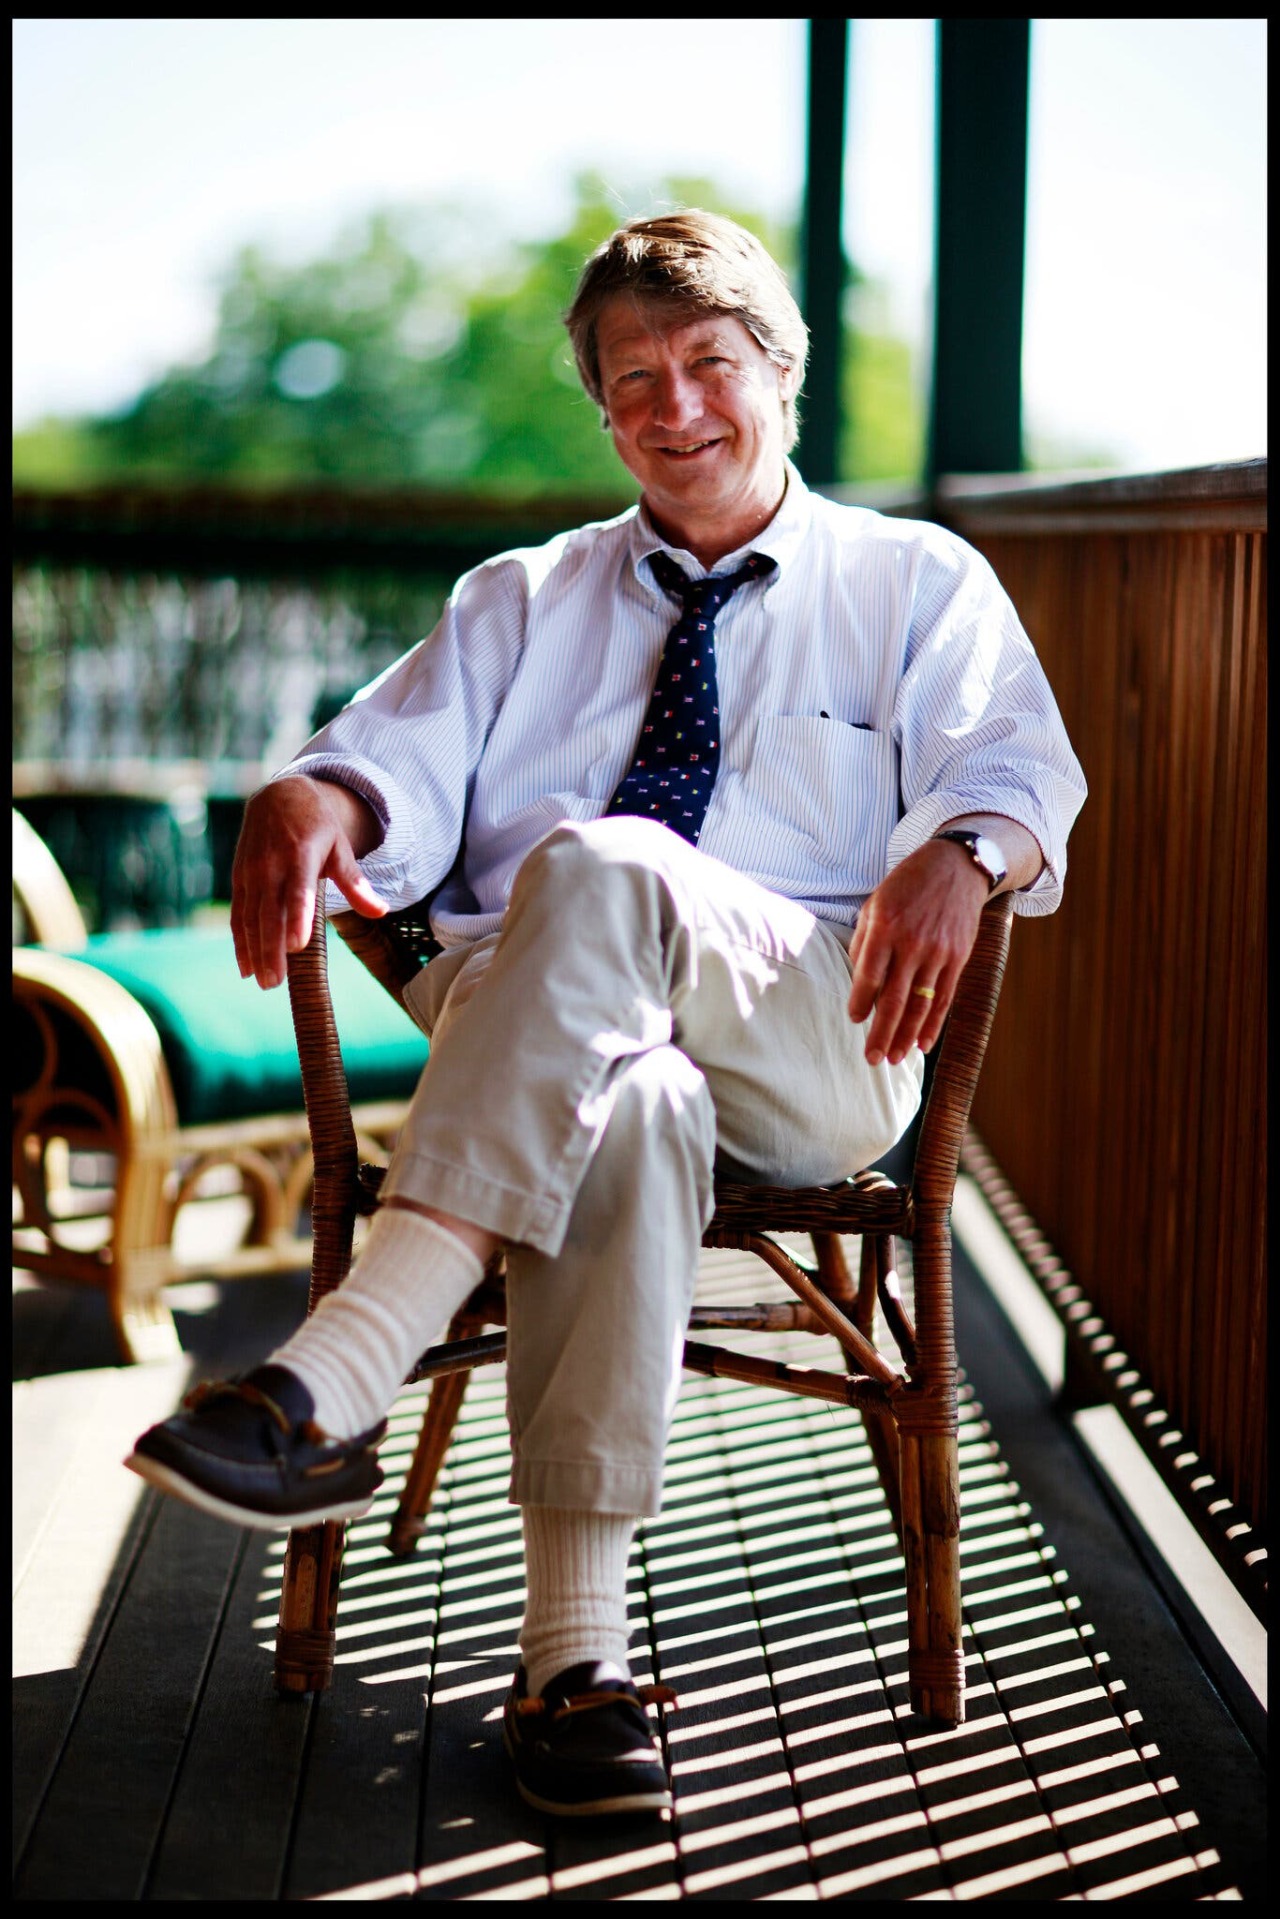 themaninthegreenshirt:
““You can’t get good Chinese takeout in China and Cuban cigars are rationed in Cuba. That’s all you need to know about communism.”
P.J. O'Rourke R.I.P.
”